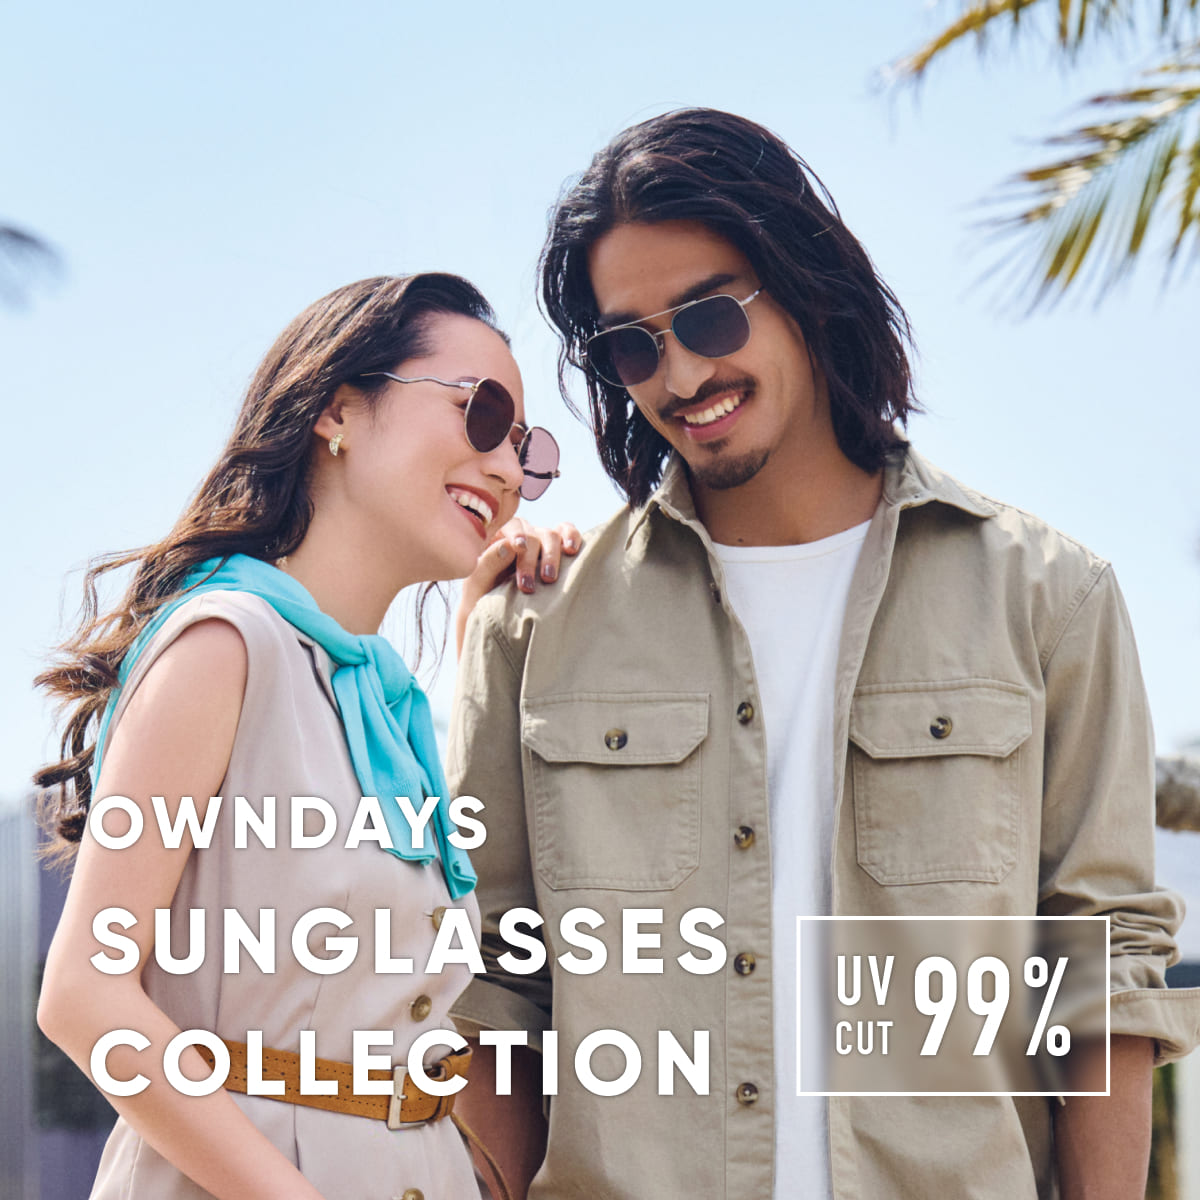 OWNDAYS SUNGLASSES COLLECTION